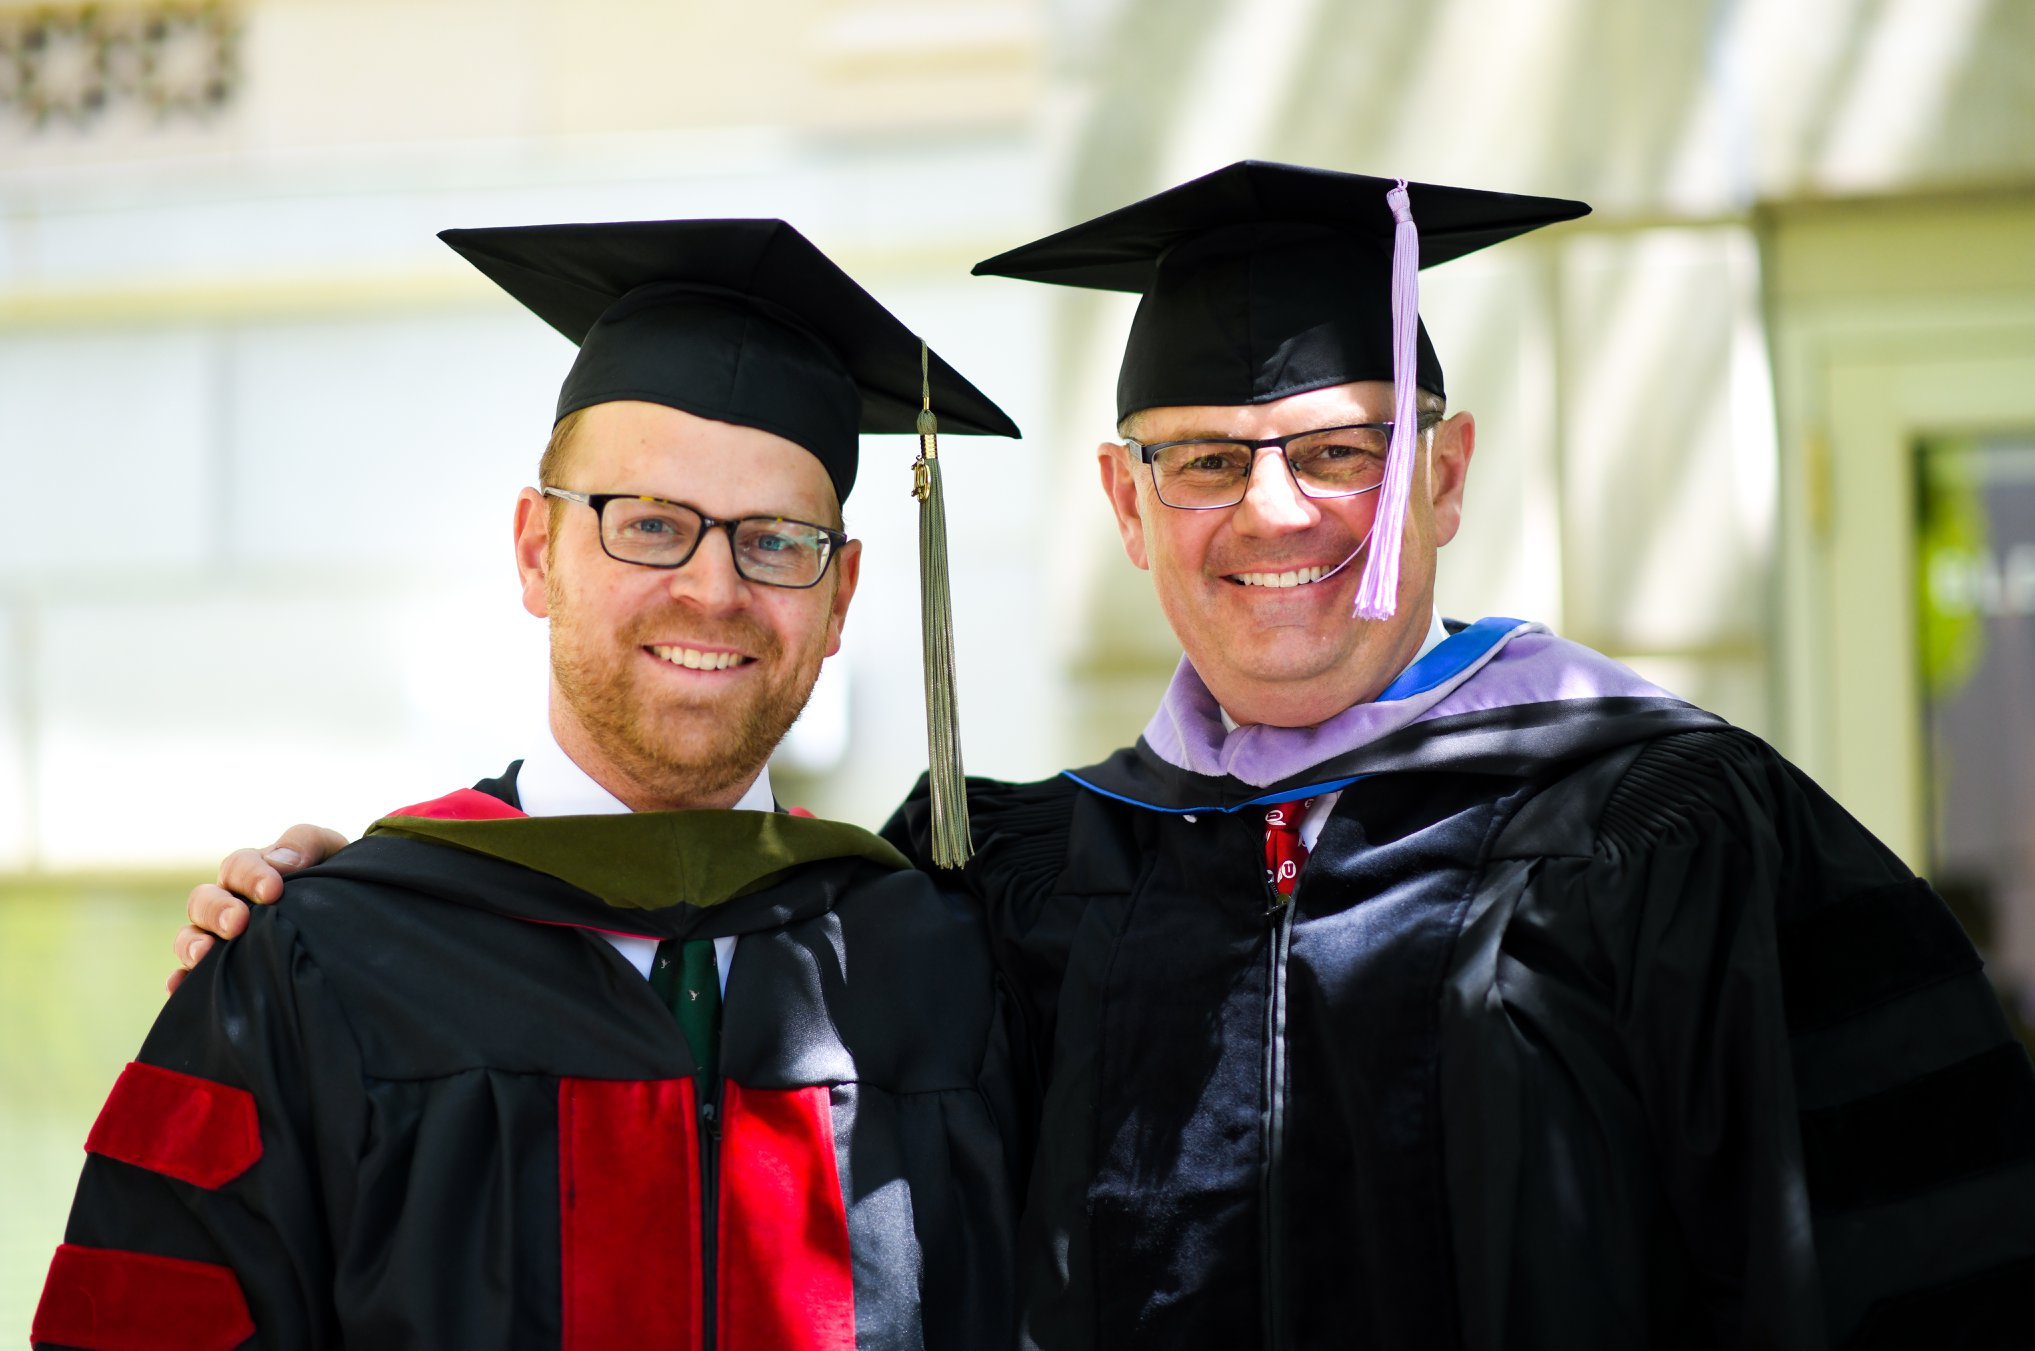 two men in graduation robes